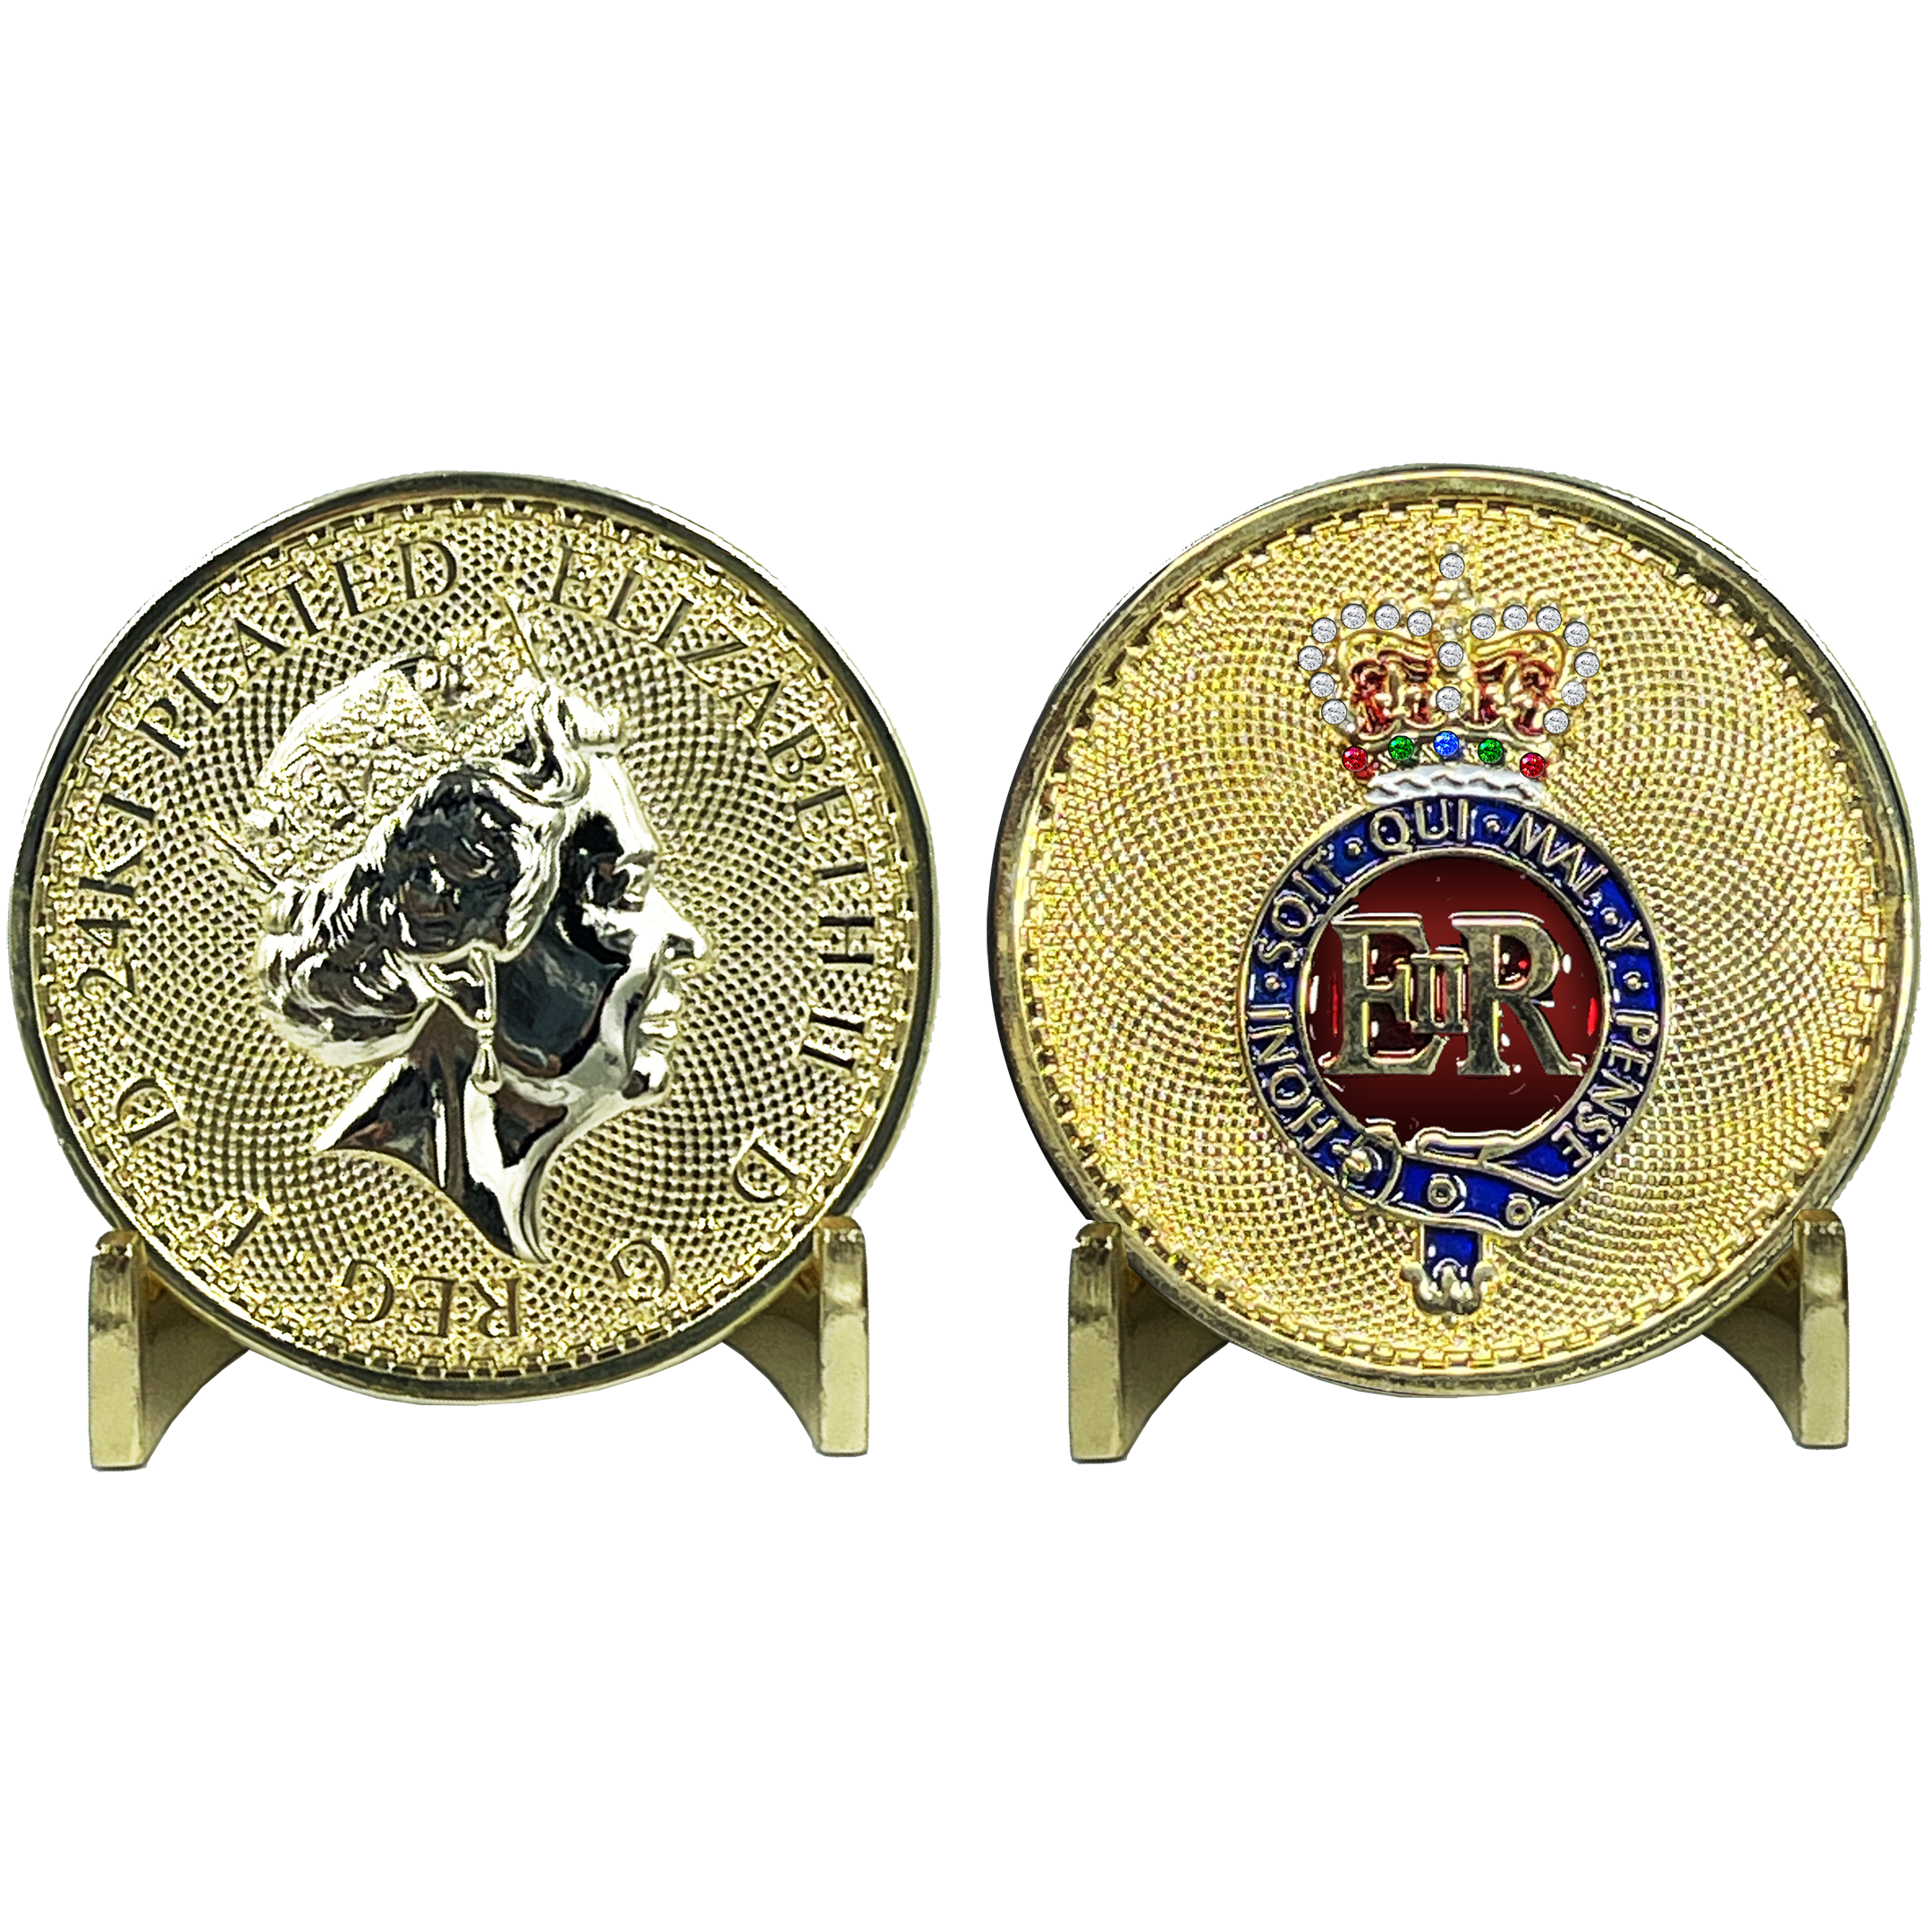 BL8-010 Queen Elizabeth 24KT Gold Plated Challenge Coin UK Queen's Guard Grenadier Guards Buckingham Palace